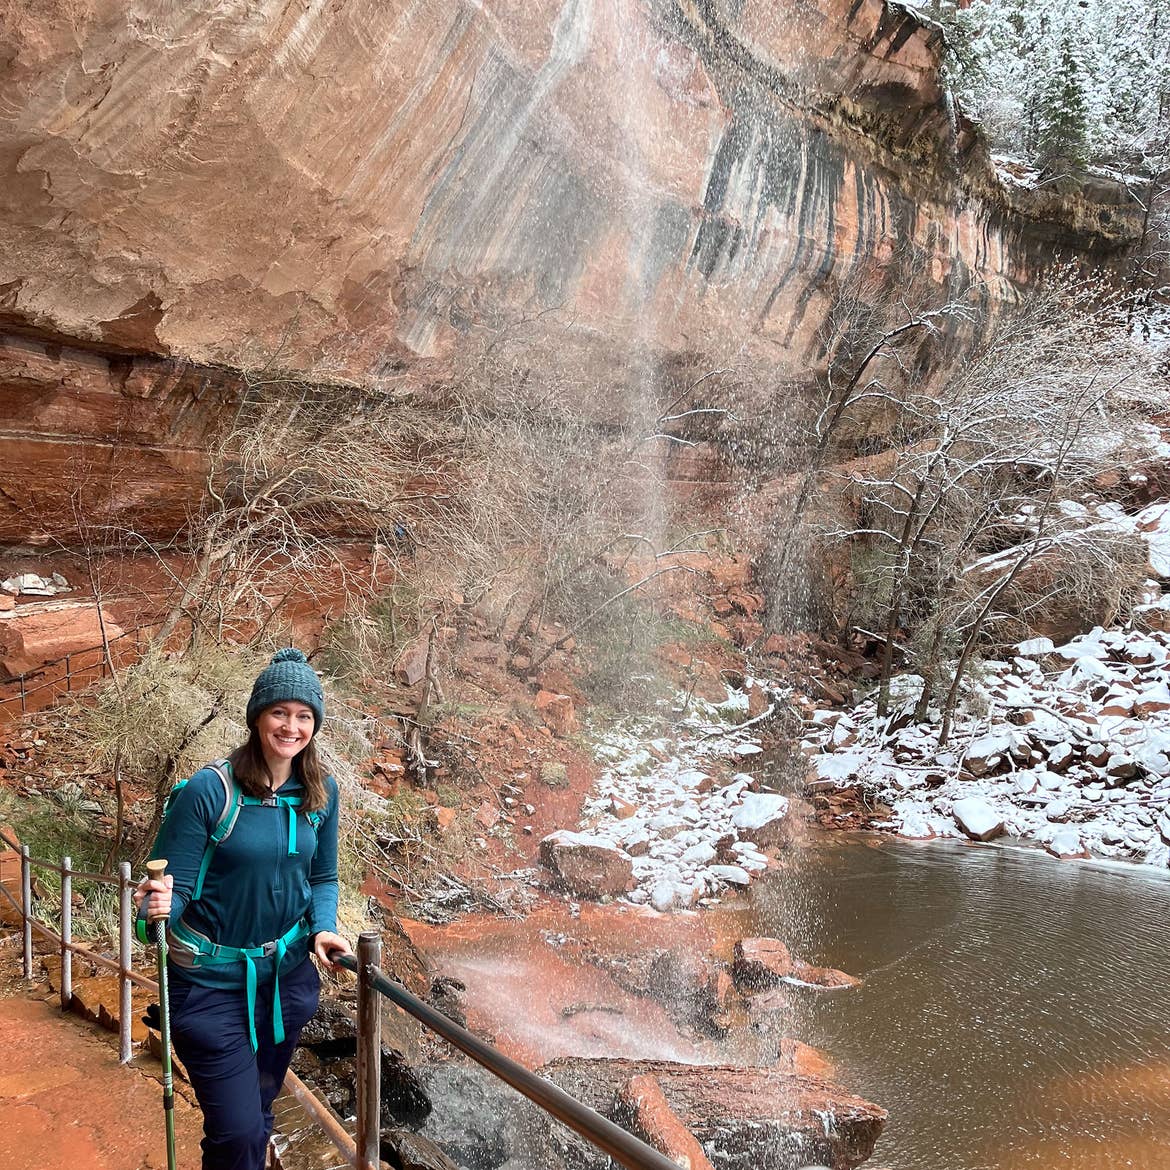 A woman in an aqua pullover, knitted cap and holding walking sticks stands near a waterfall.